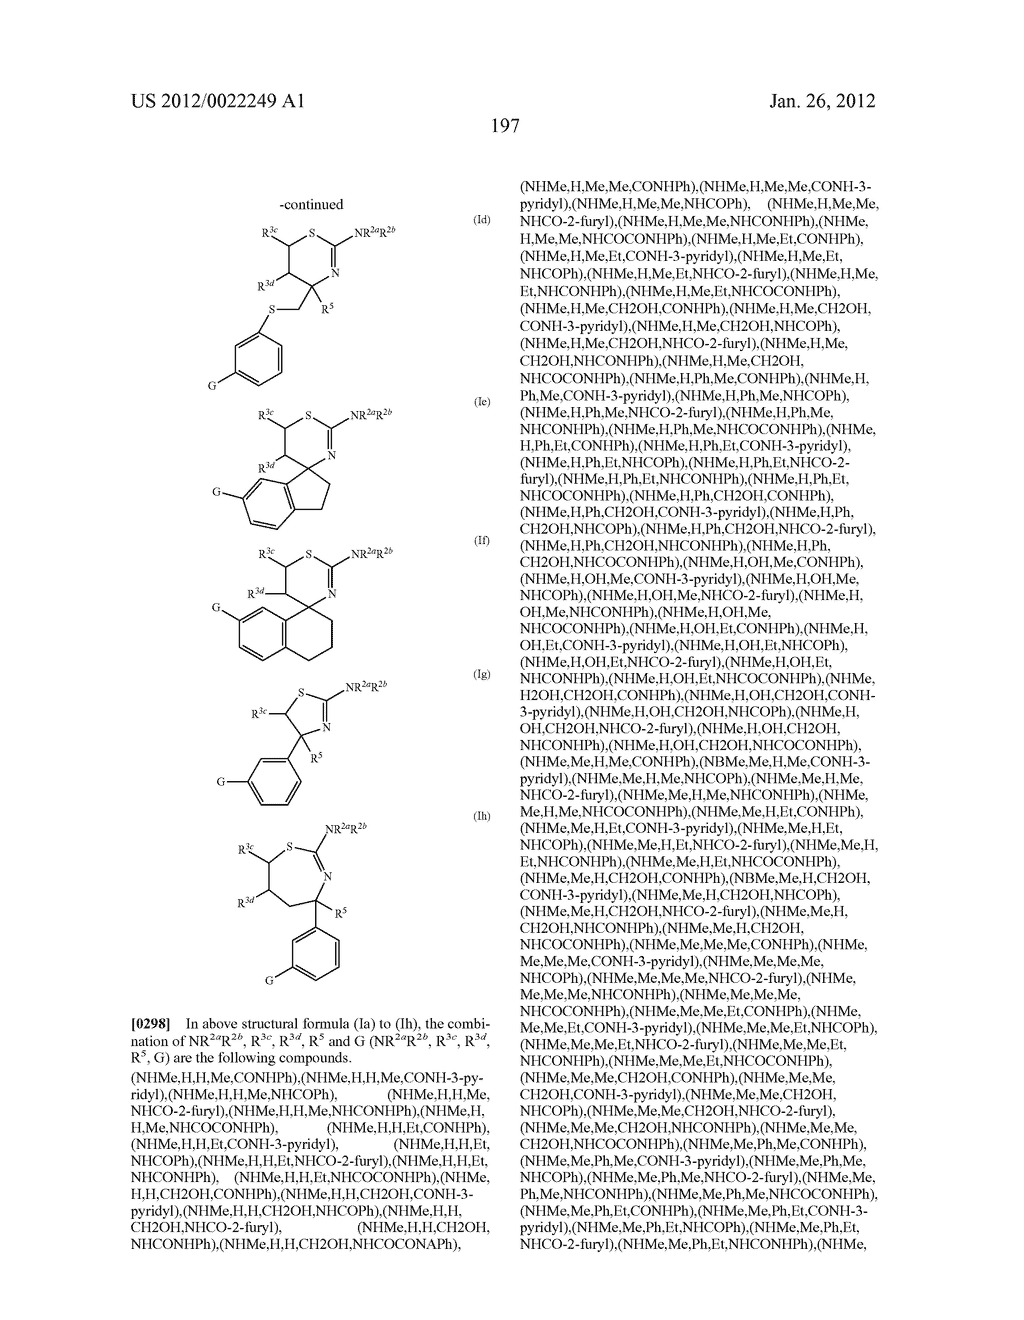 AMINODIHYDROTHIAZINE DERIVATIVES - diagram, schematic, and image 198